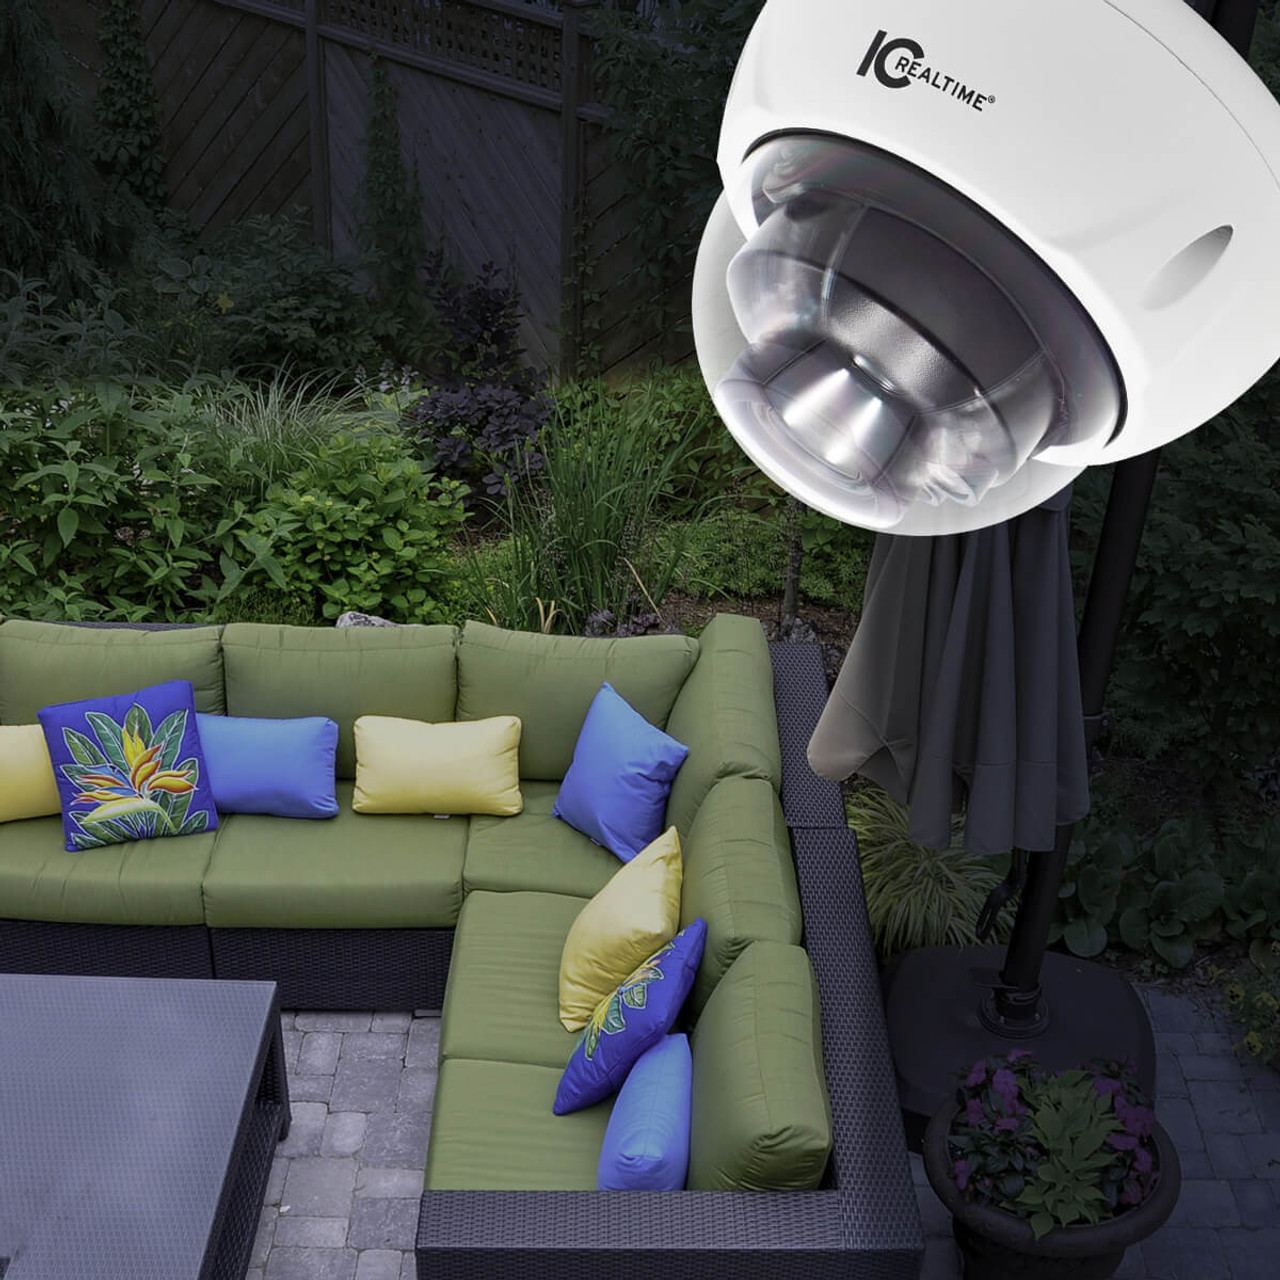 IC Realtime Edge 4MP 2.8-12mm Varifocal Outdoor Vandal PoE Dome IP Camera